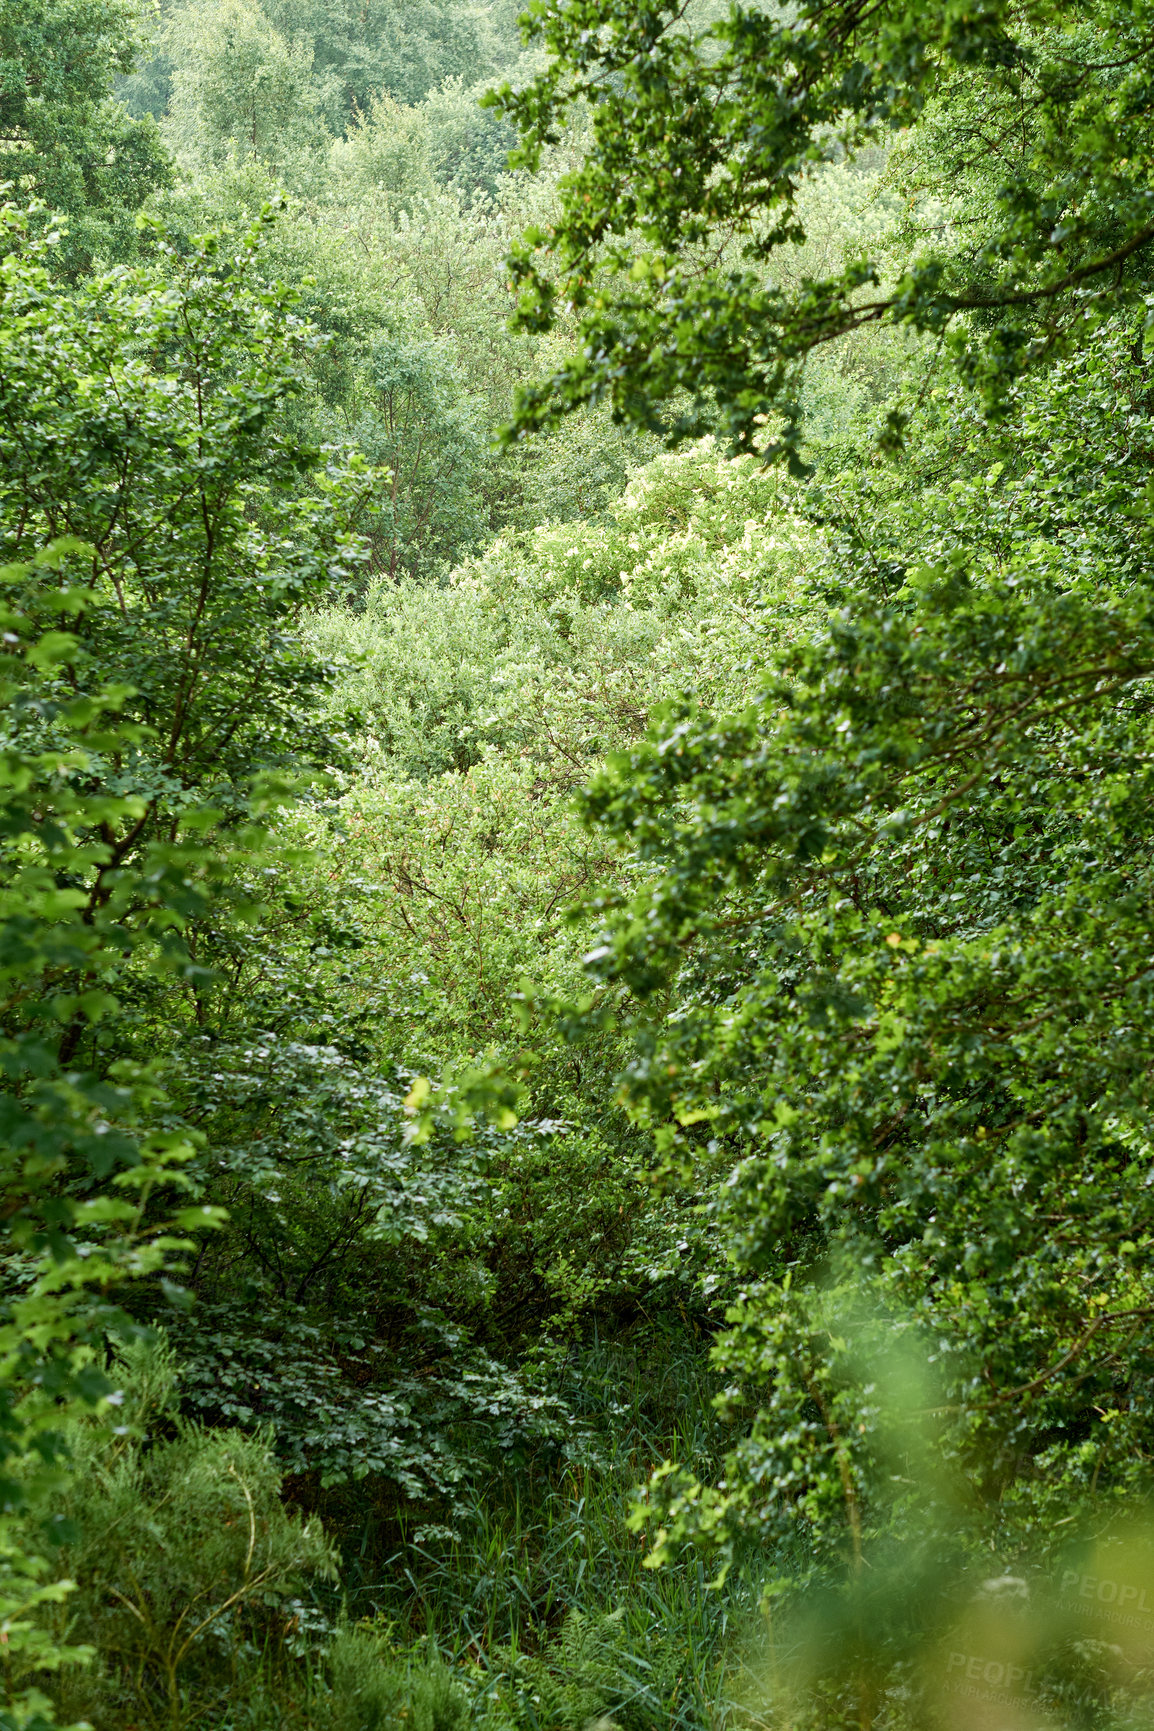 Buy stock photo A photo of green and lush forest